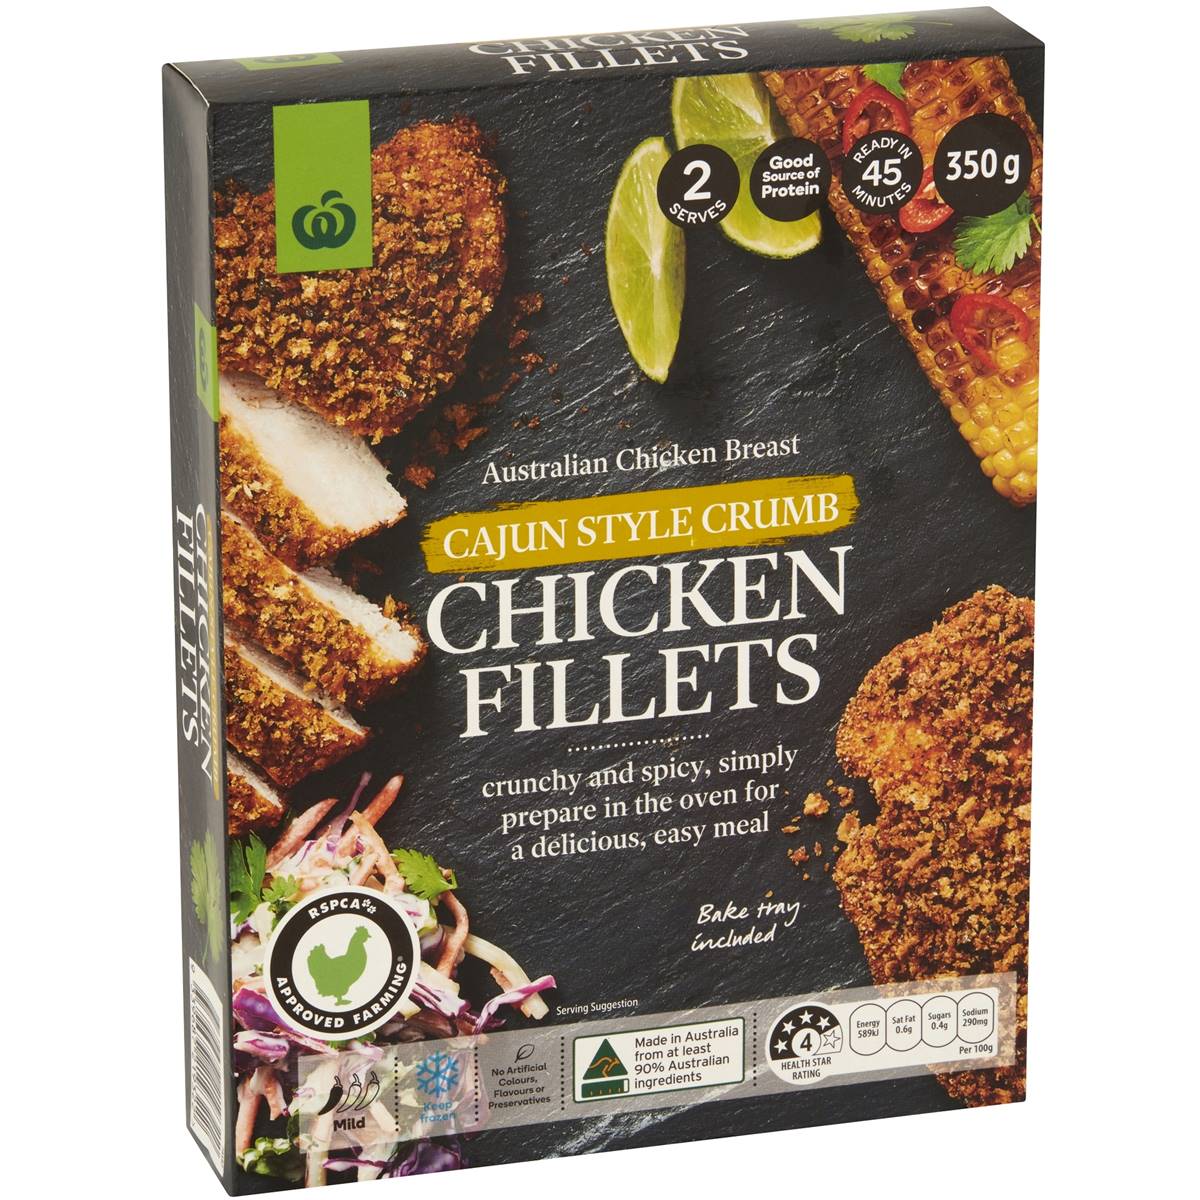 Calories in Woolworths Chicken Breast Fillets Cajun Style Crumb